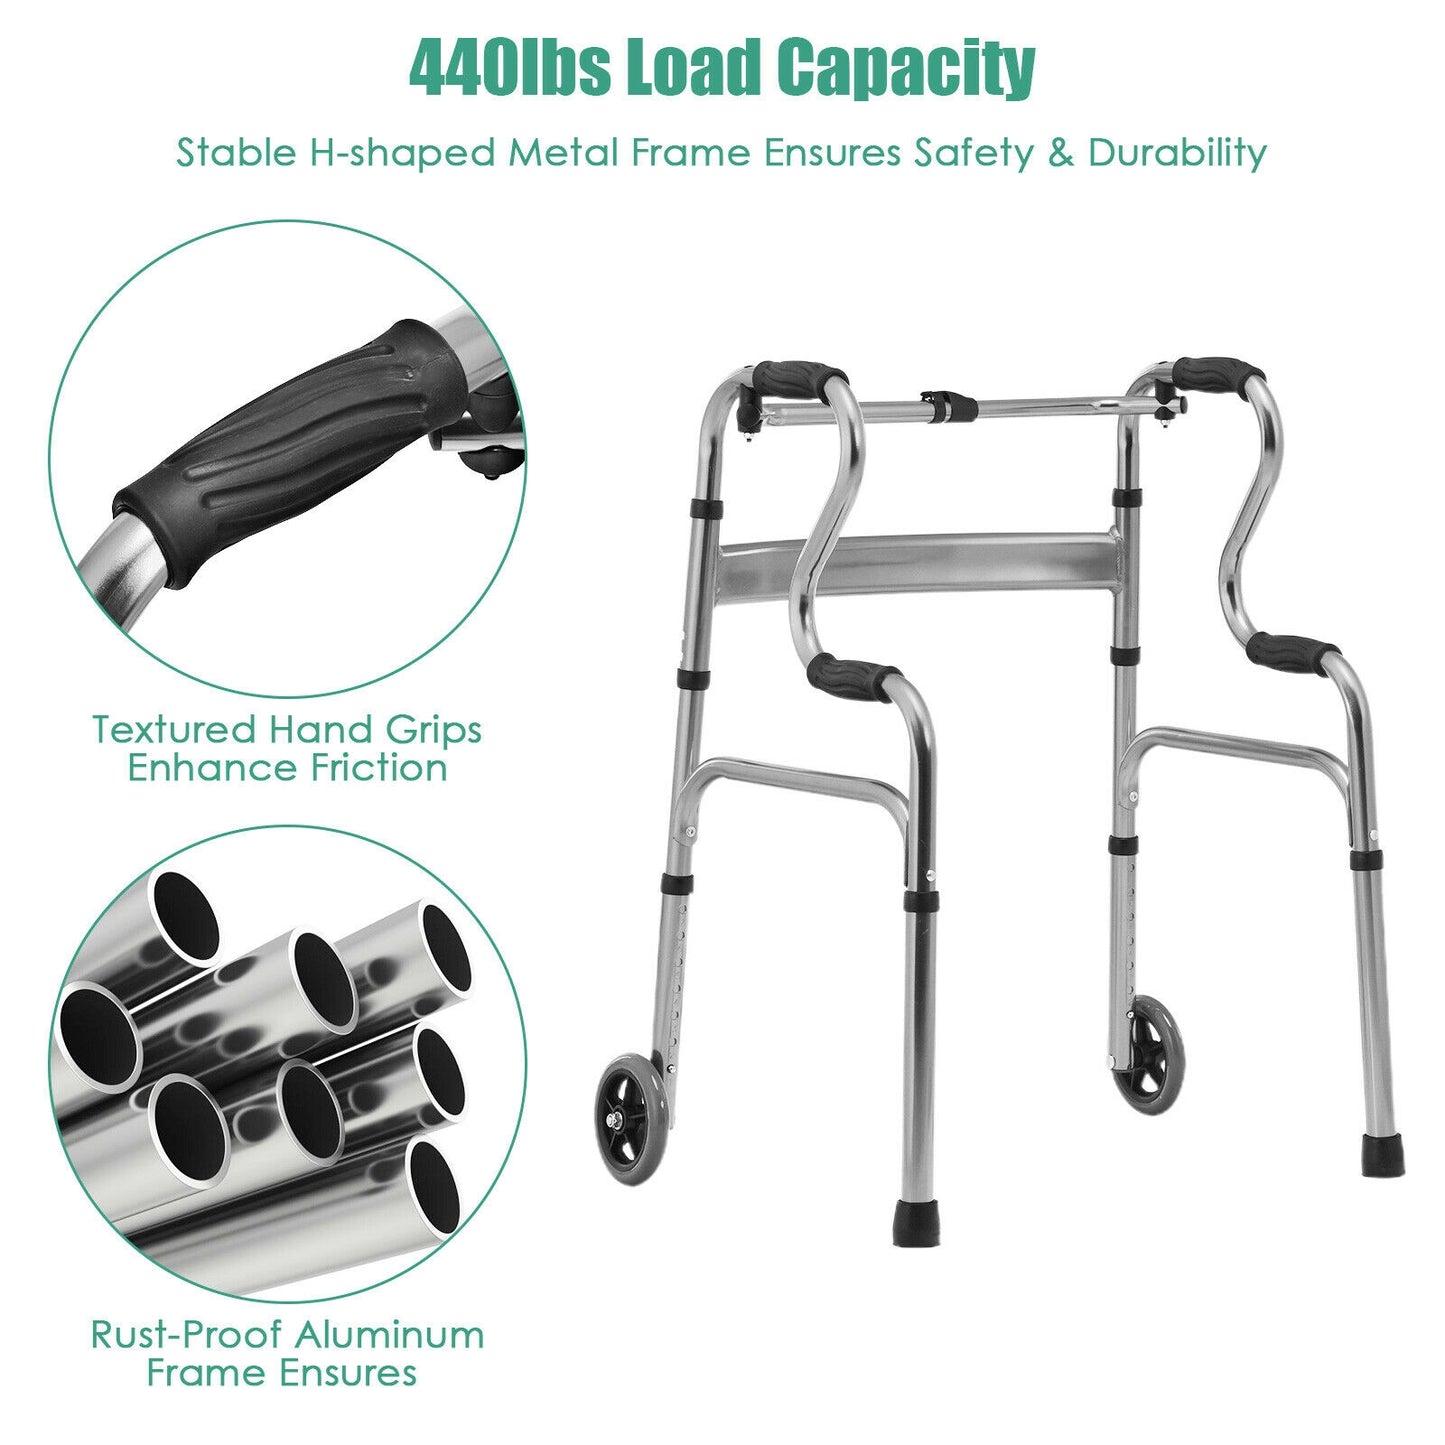 Adjustable Heavy-Duty Folding Walker with Unidirectional Wheels and Bi-Level Armrests at Gallery Canada